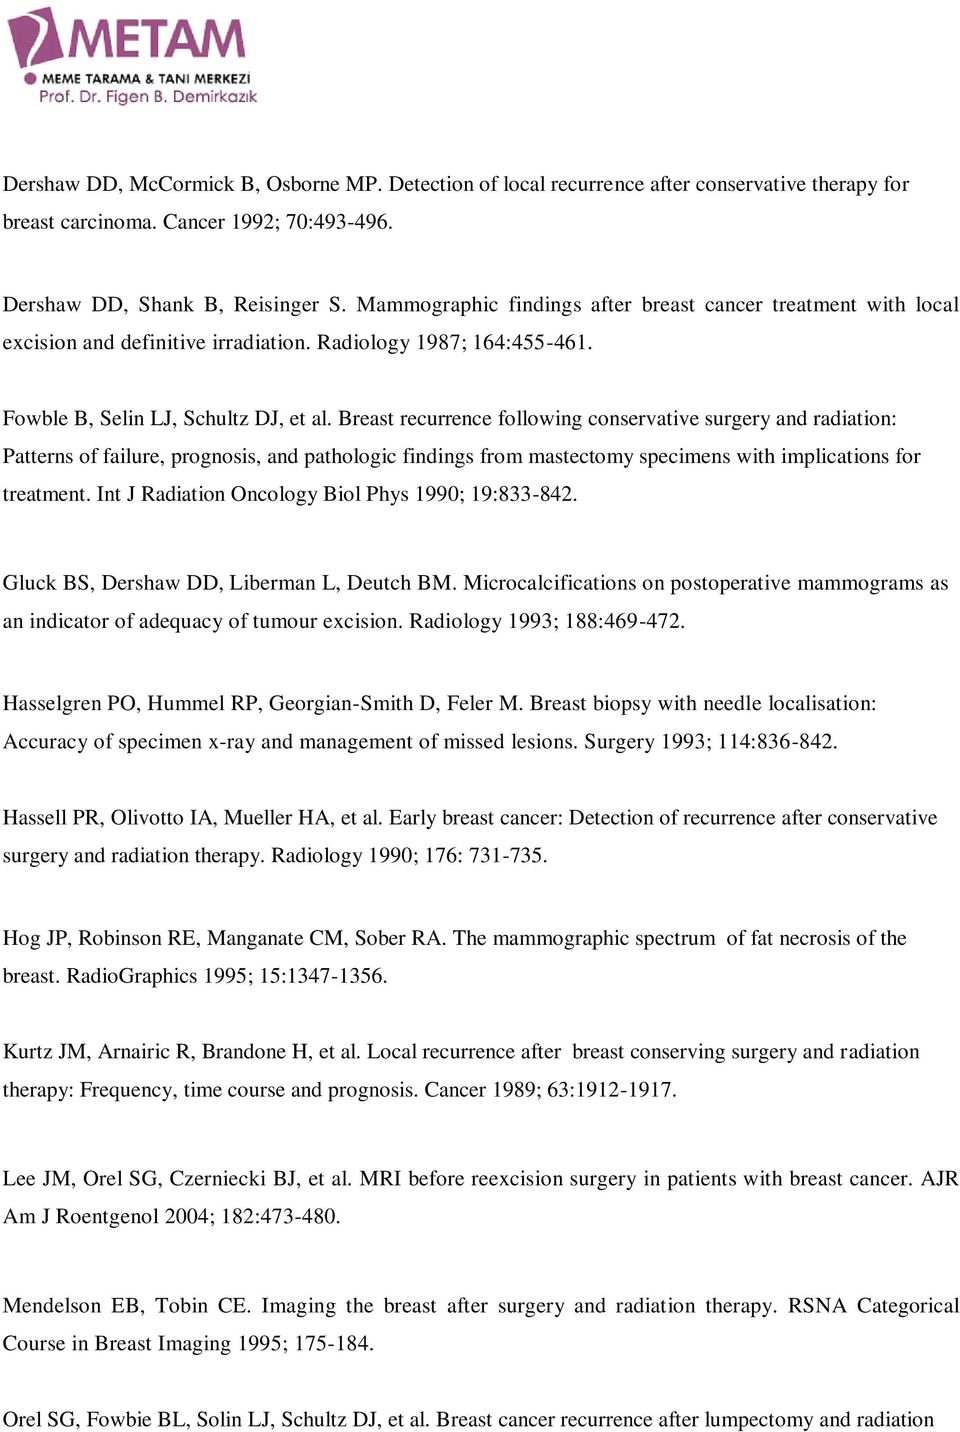 Breast recurrence following conservative surgery and radiation: Patterns of failure, prognosis, and pathologic findings from mastectomy specimens with implications for treatment.